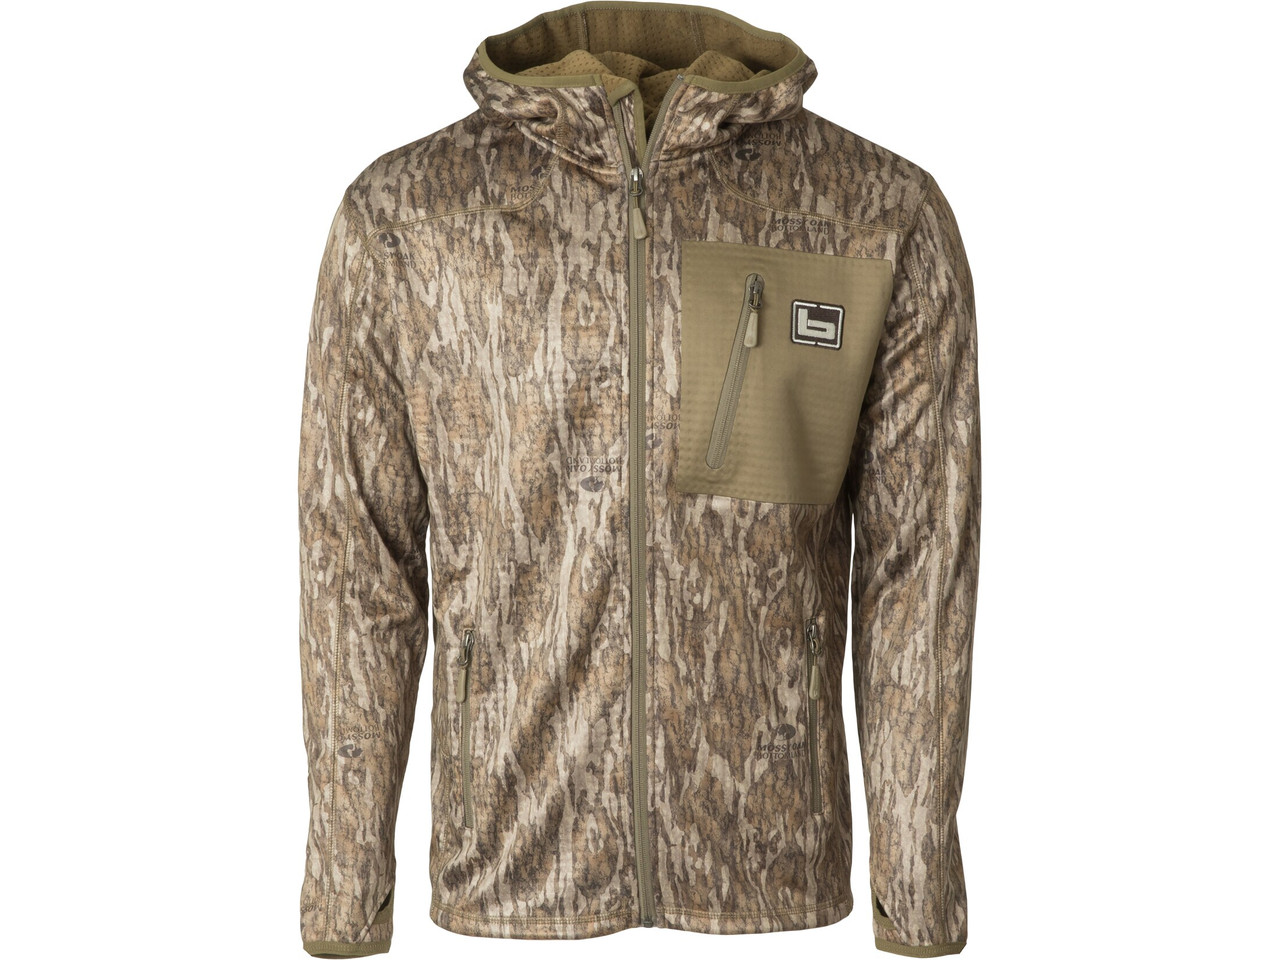 Banded Hooded Mid-Layer Fleece Pullover Bottomland XL - B1010061-BL-XL